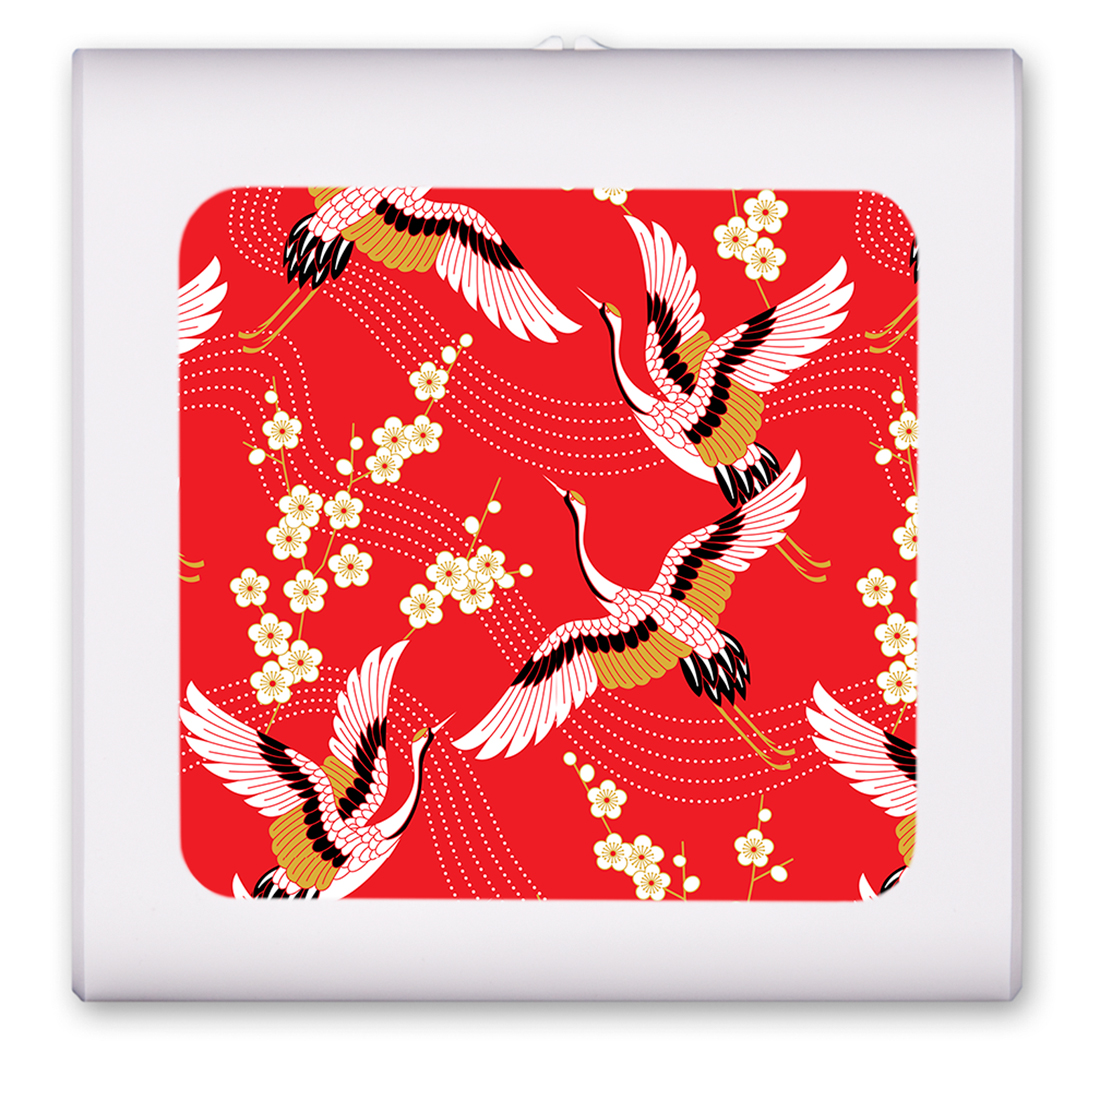 Red White and Gold Cranes - #2781